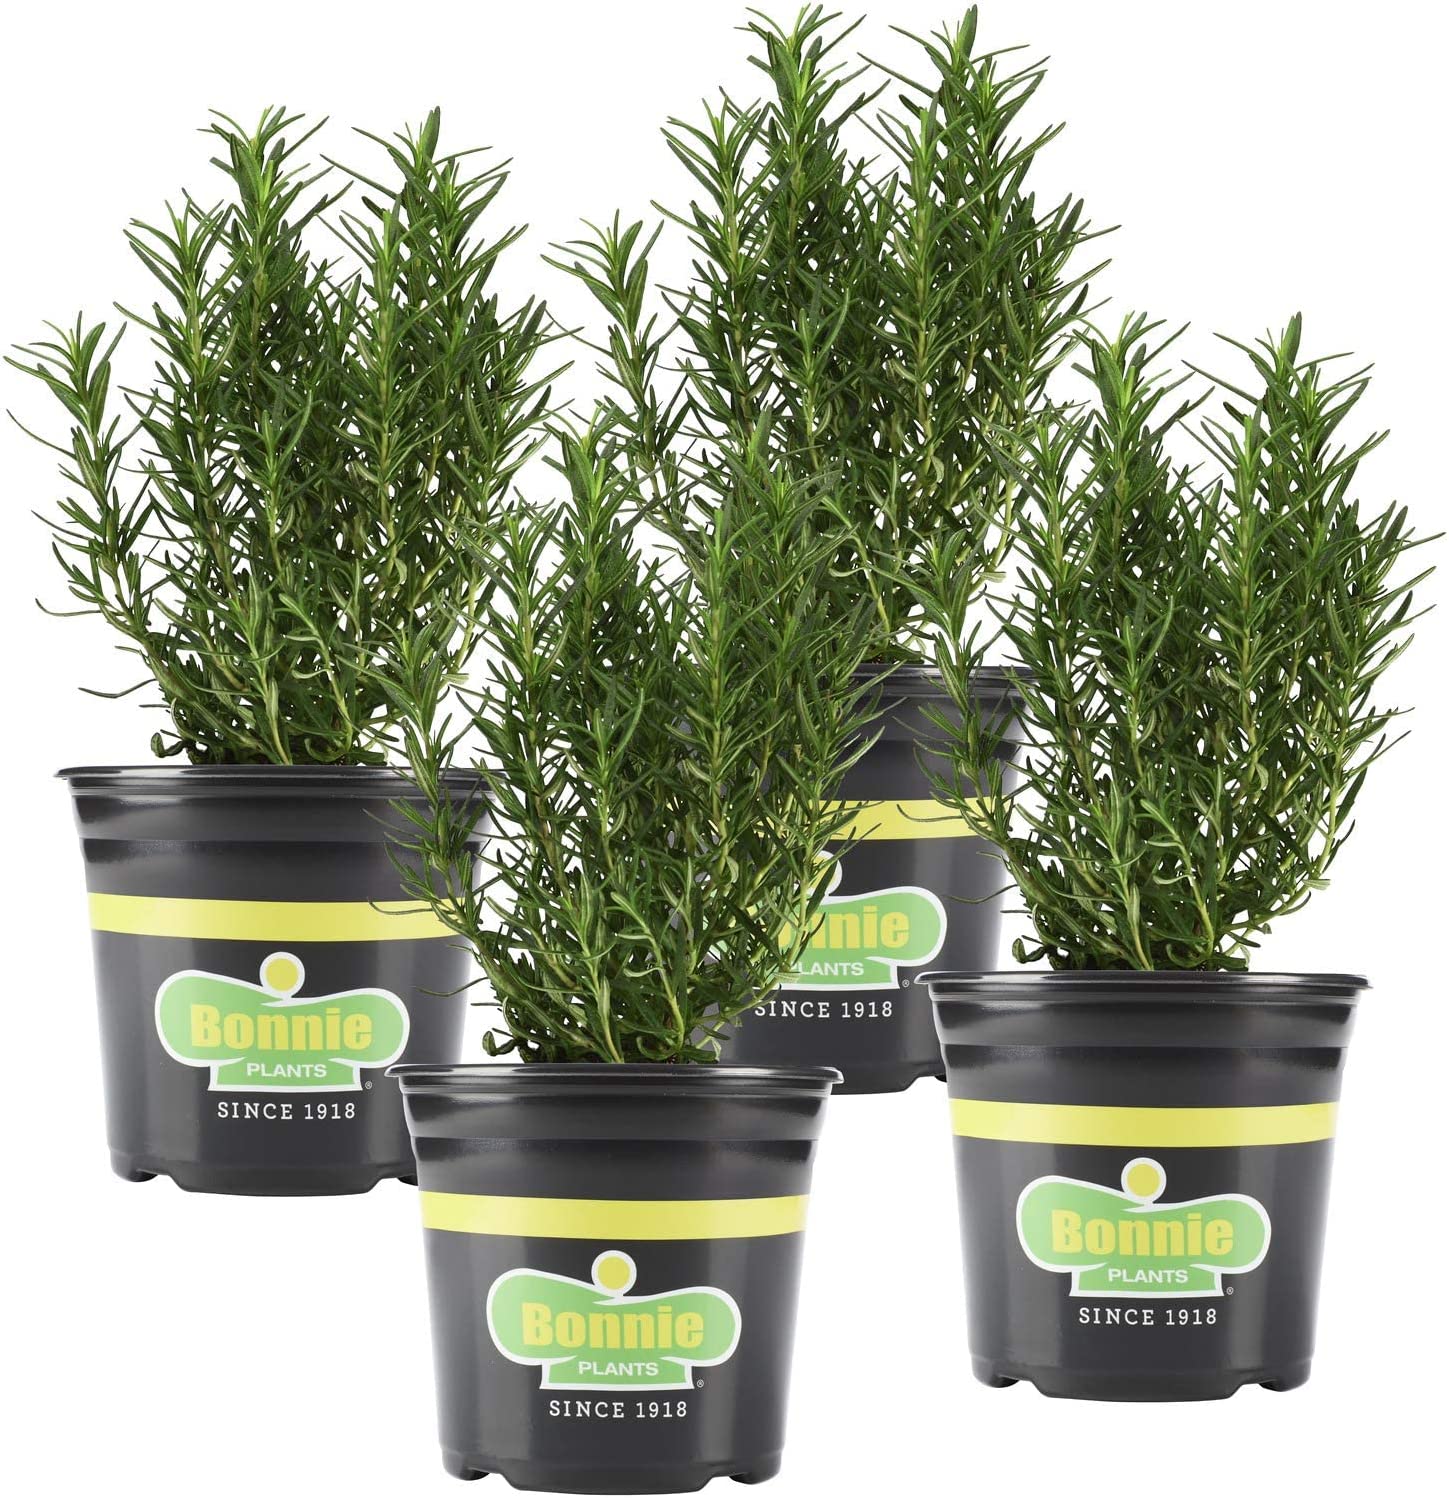 rosemary is a lovely, easy-to-grow plant with great culinary and ornamental value. A striking, upright evergreen shrub that is winter-hardy in zones 8 to 10